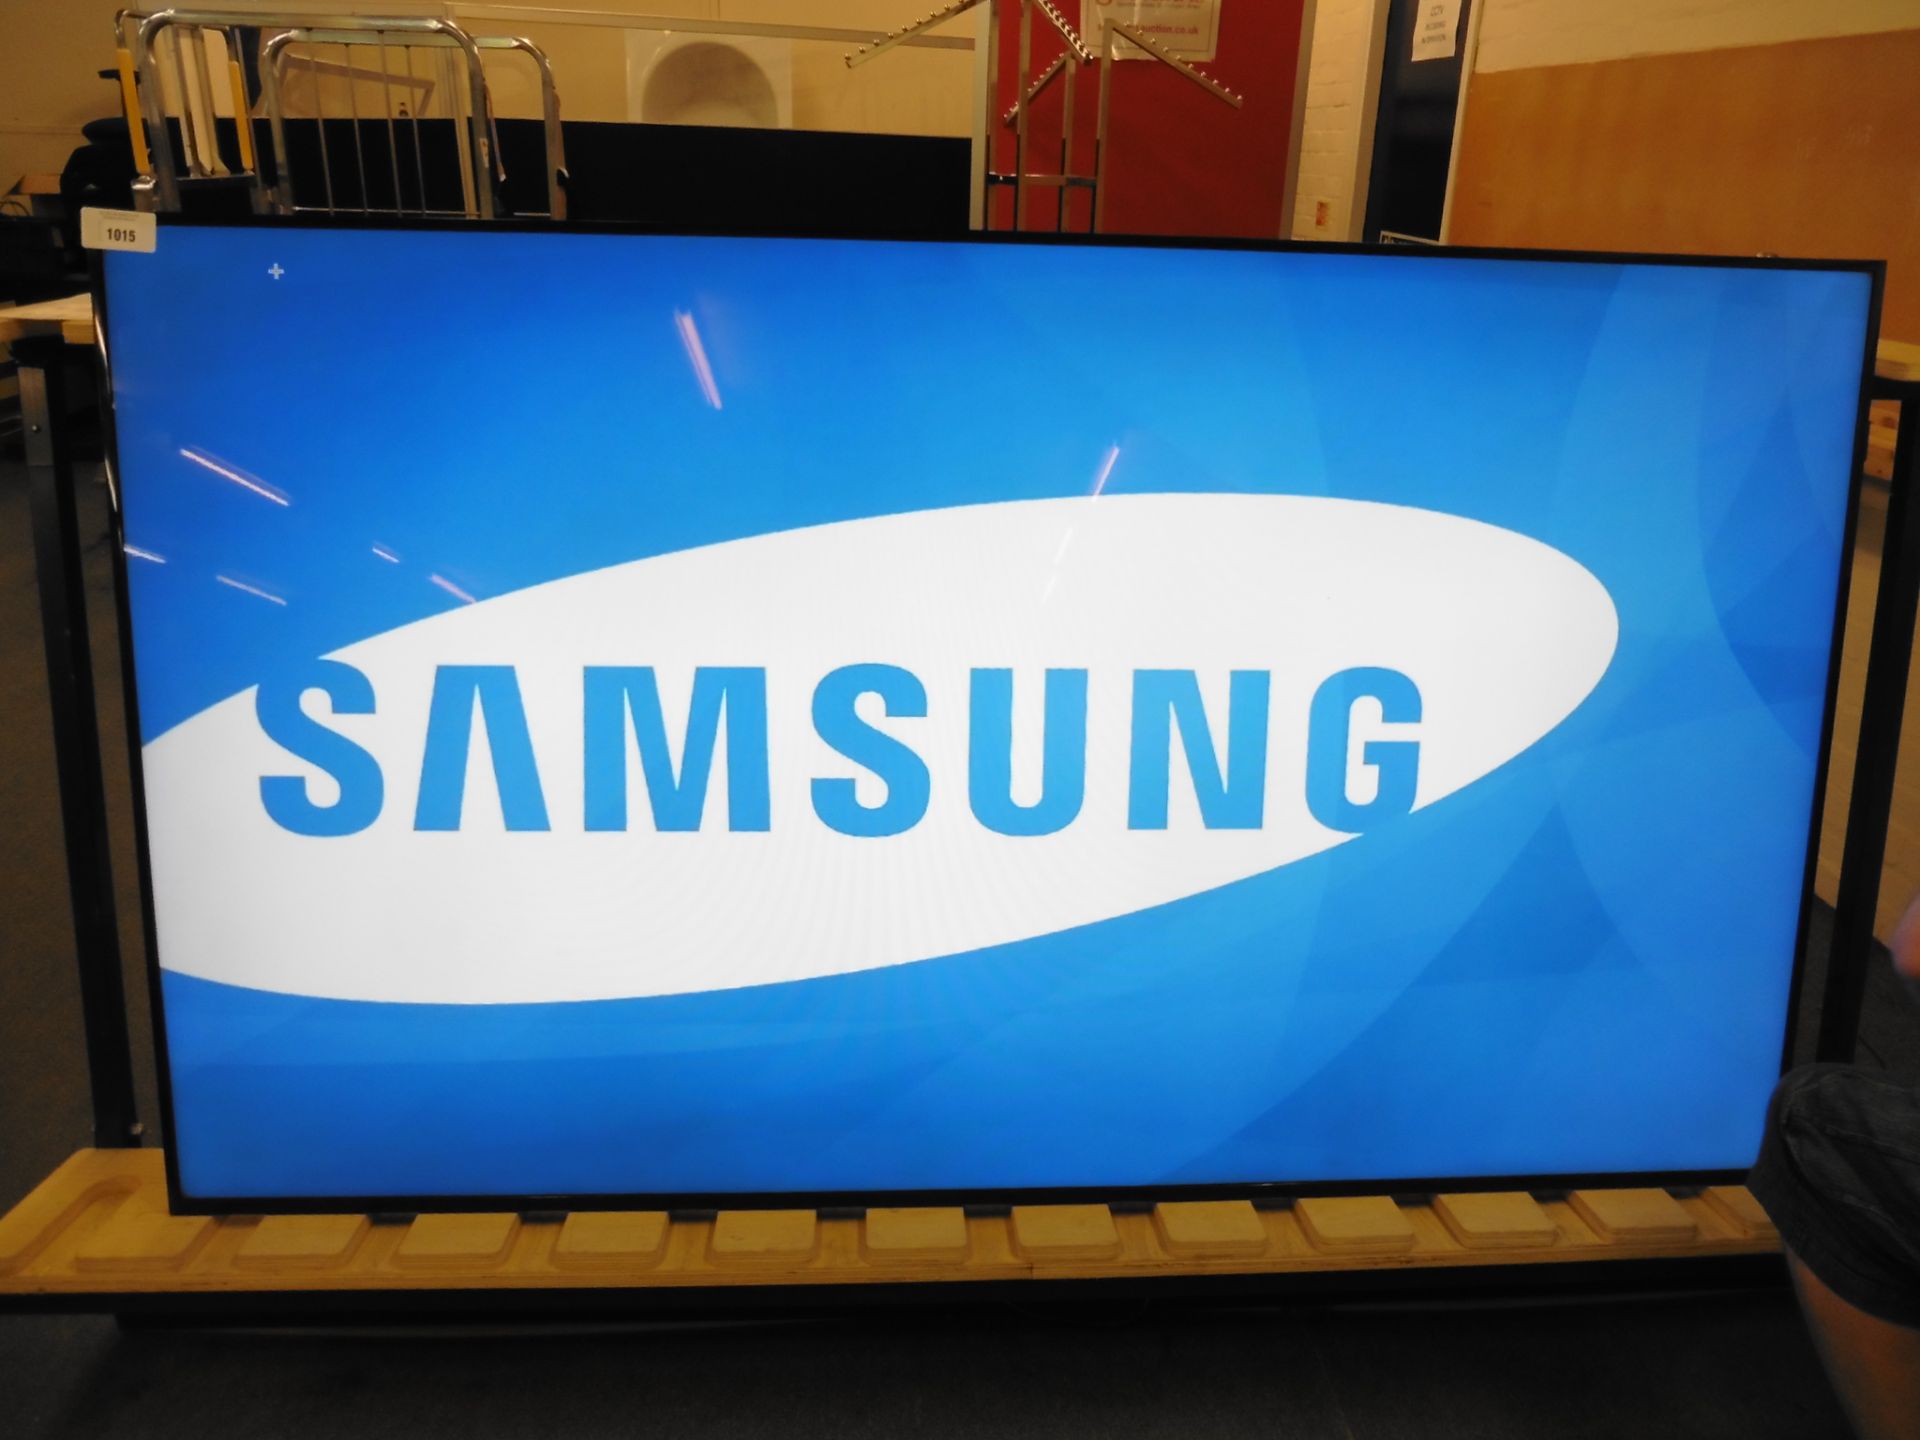 Samsung model LH75DMD professional display screen with remote (manufactured 2015)